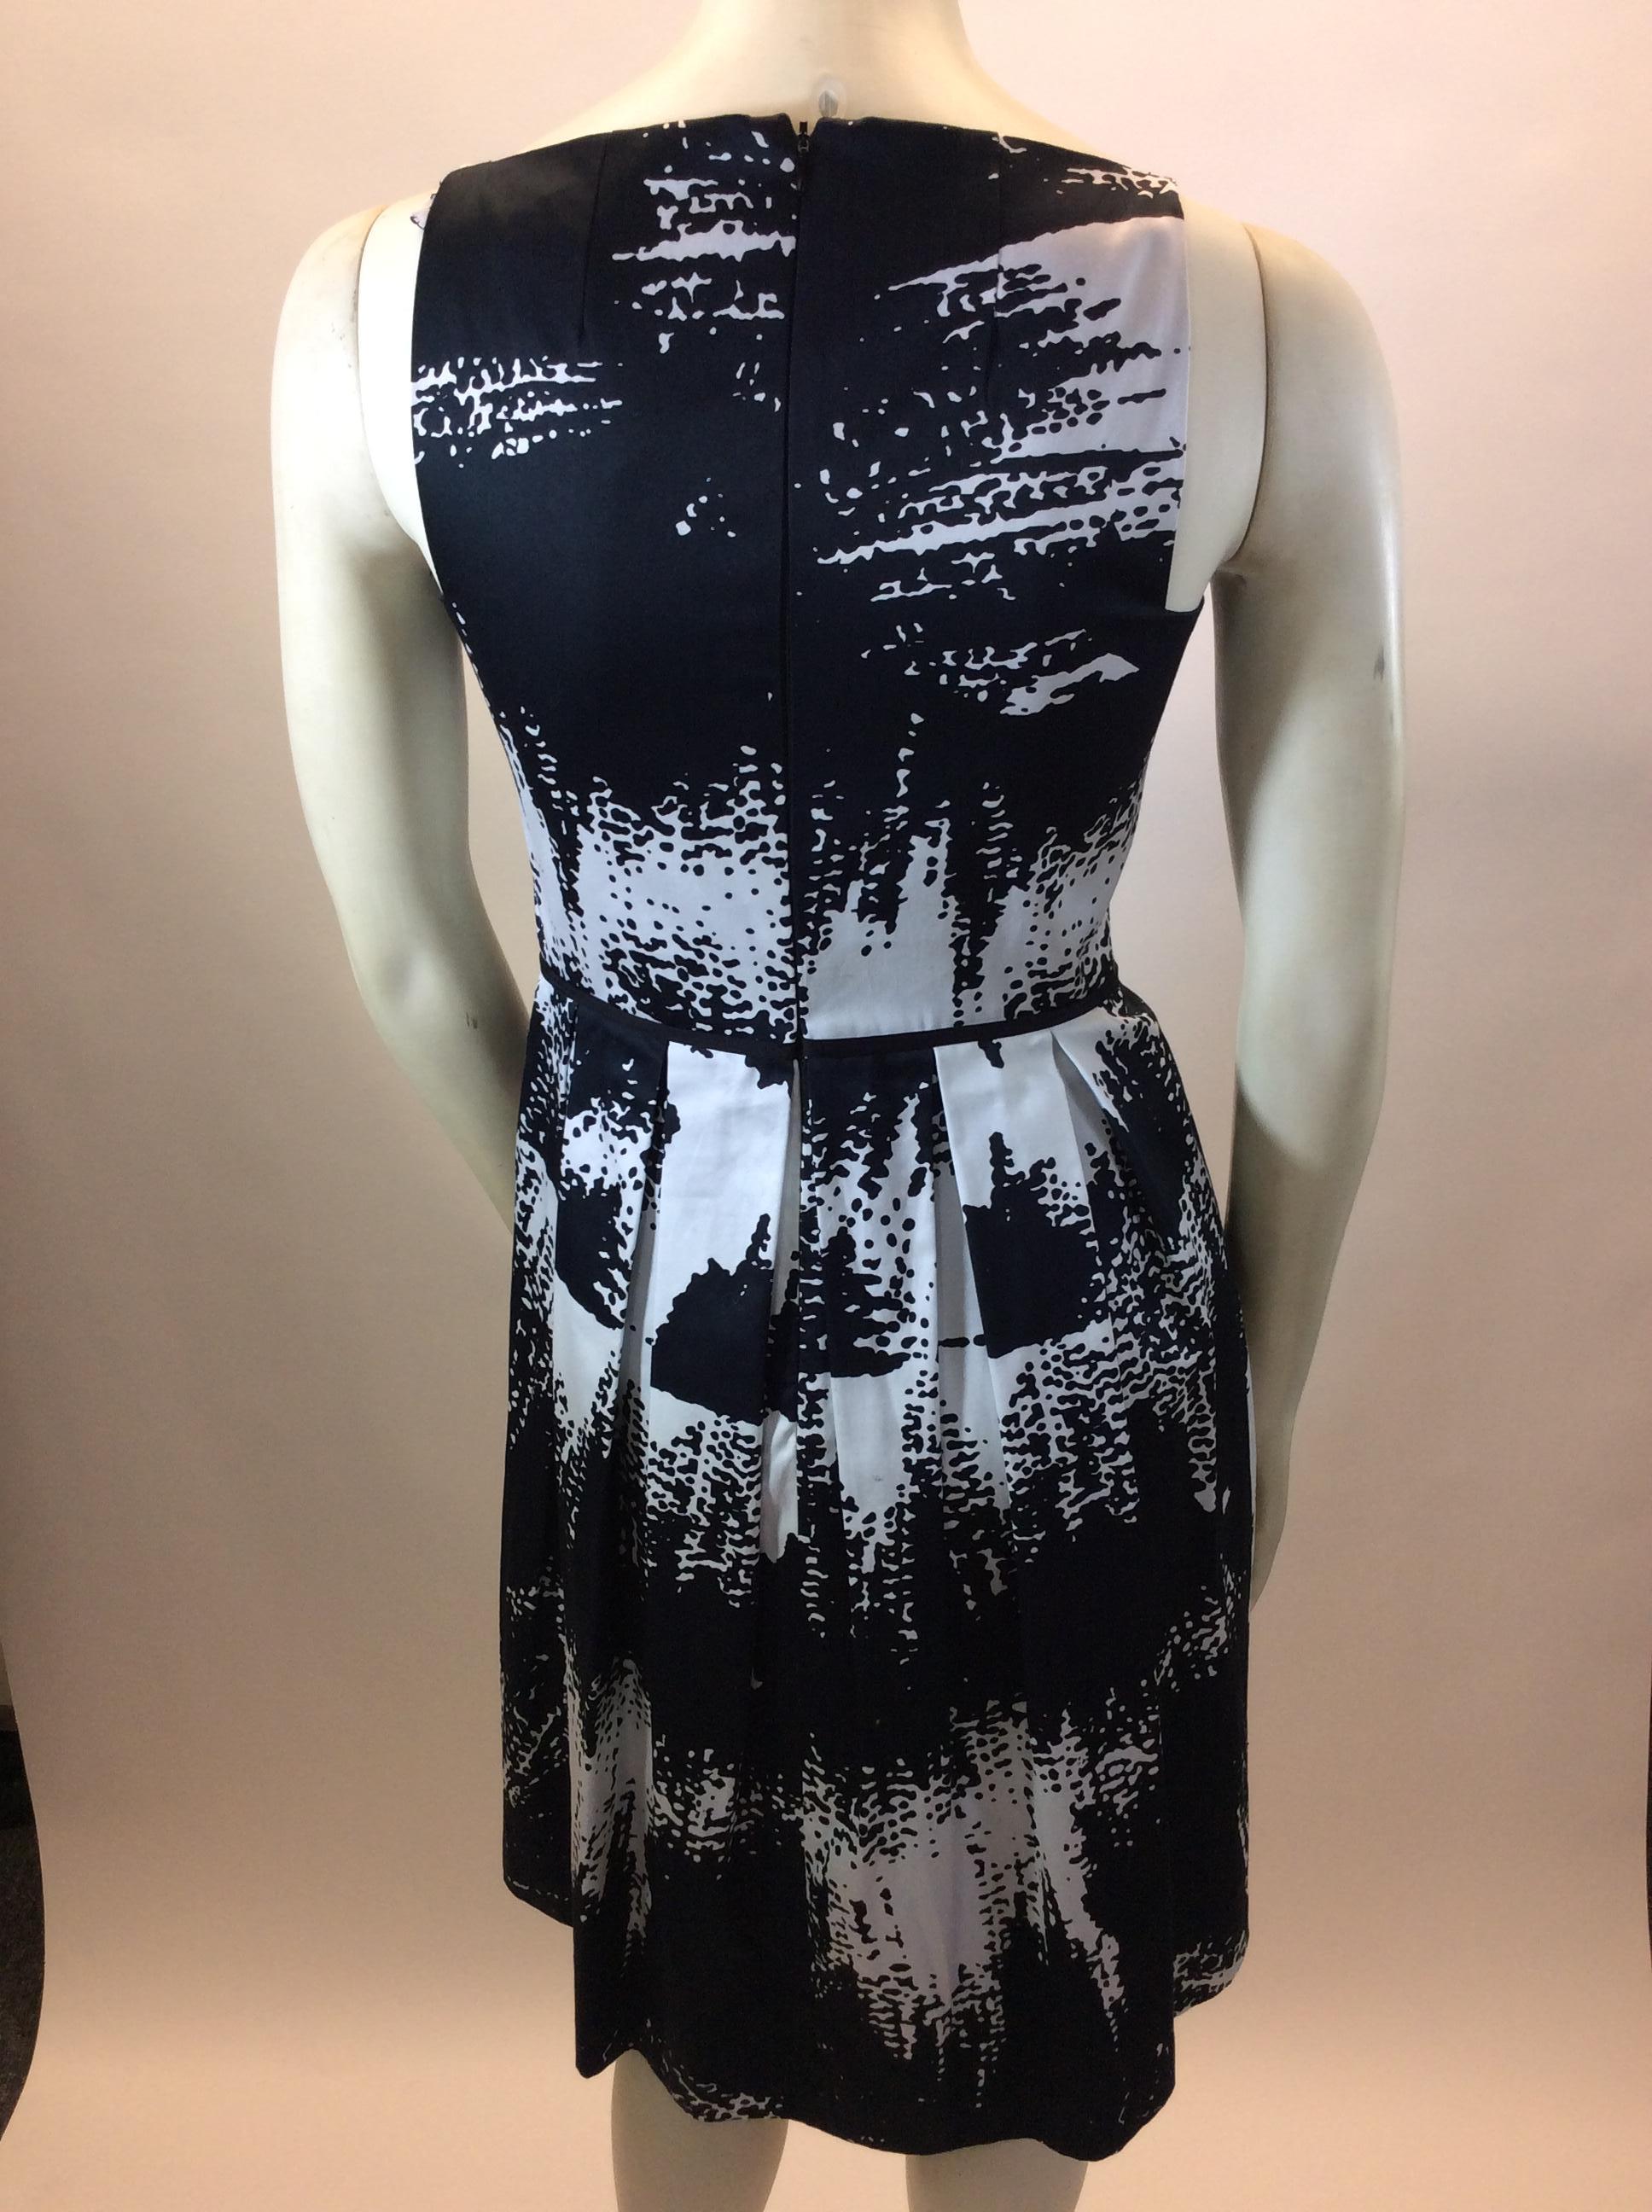 Max Mara Black and White Print Dress In Good Condition For Sale In Narberth, PA